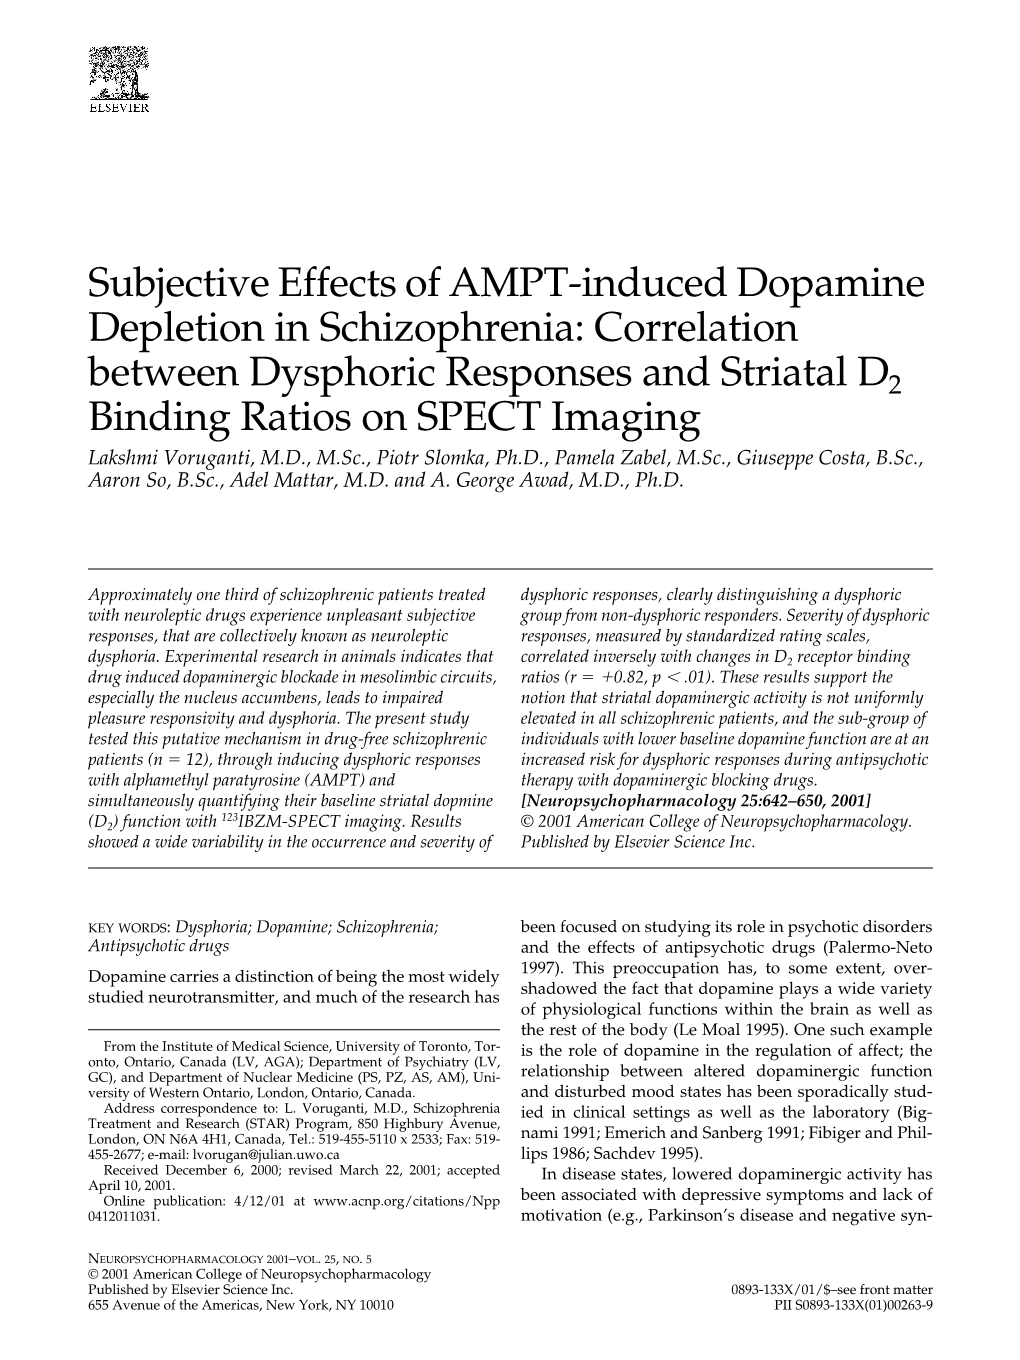 Subjective Effects of AMPT-Induced Dopamine Depletion In